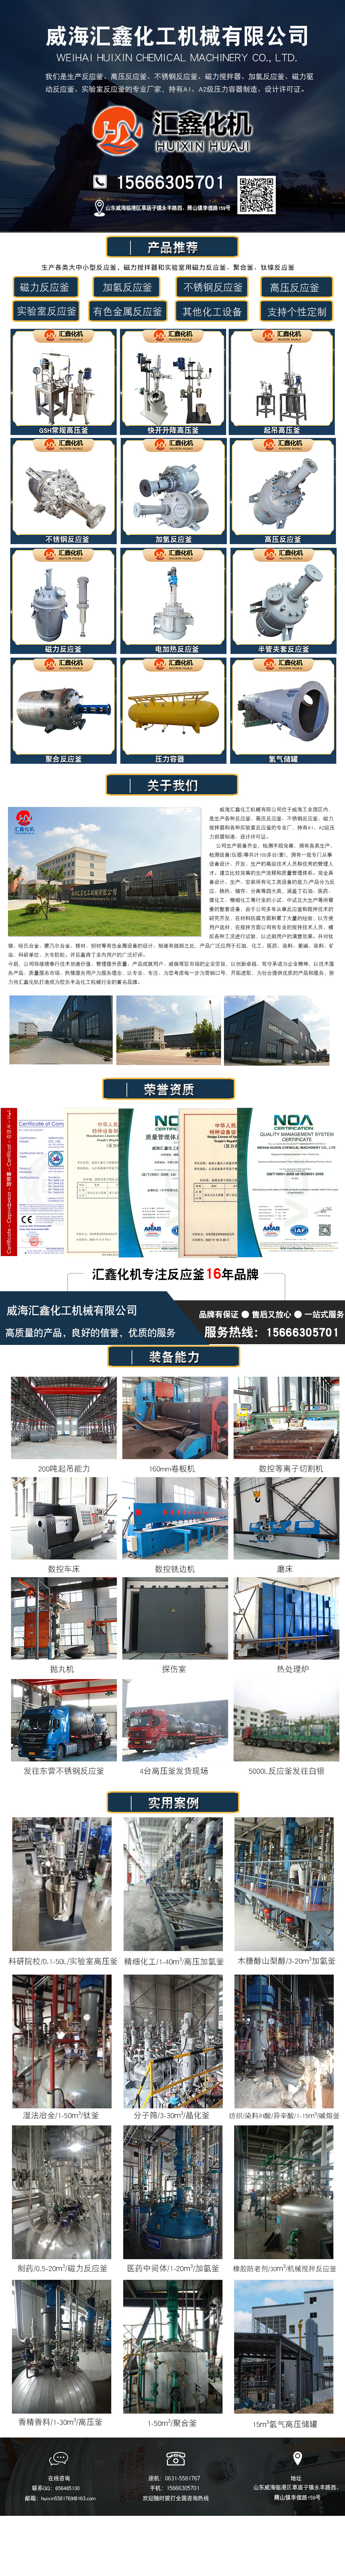 Hydrogenation reaction kettle, multifunctional stirring kettle, corrosion resistance, wear resistance, long service life, Huixin Chemical Machine